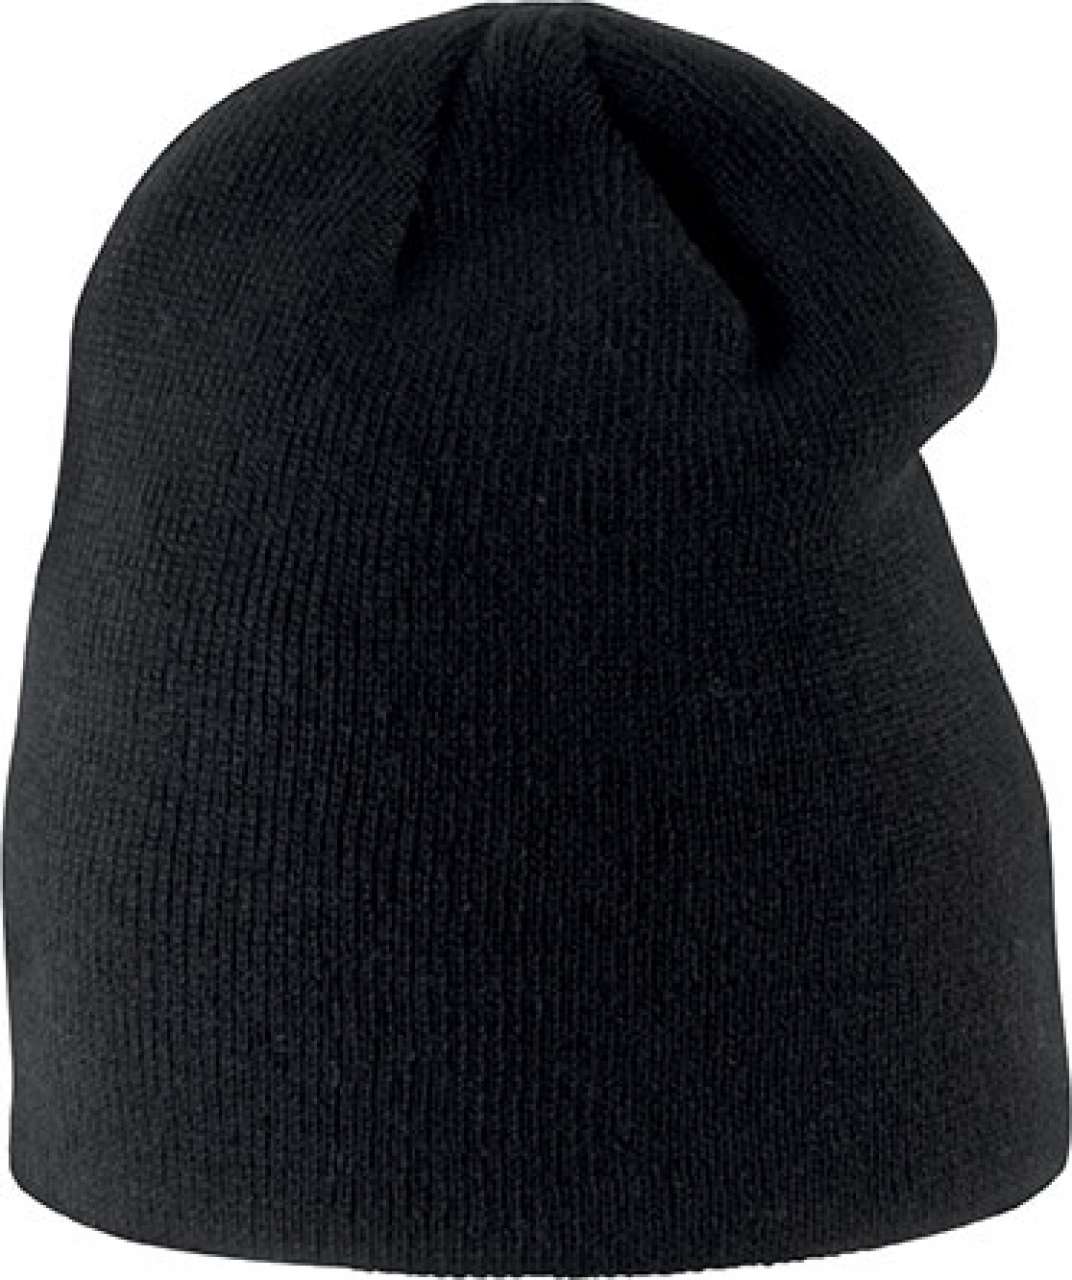 Promo  KNITTED KIDS' BEANIE